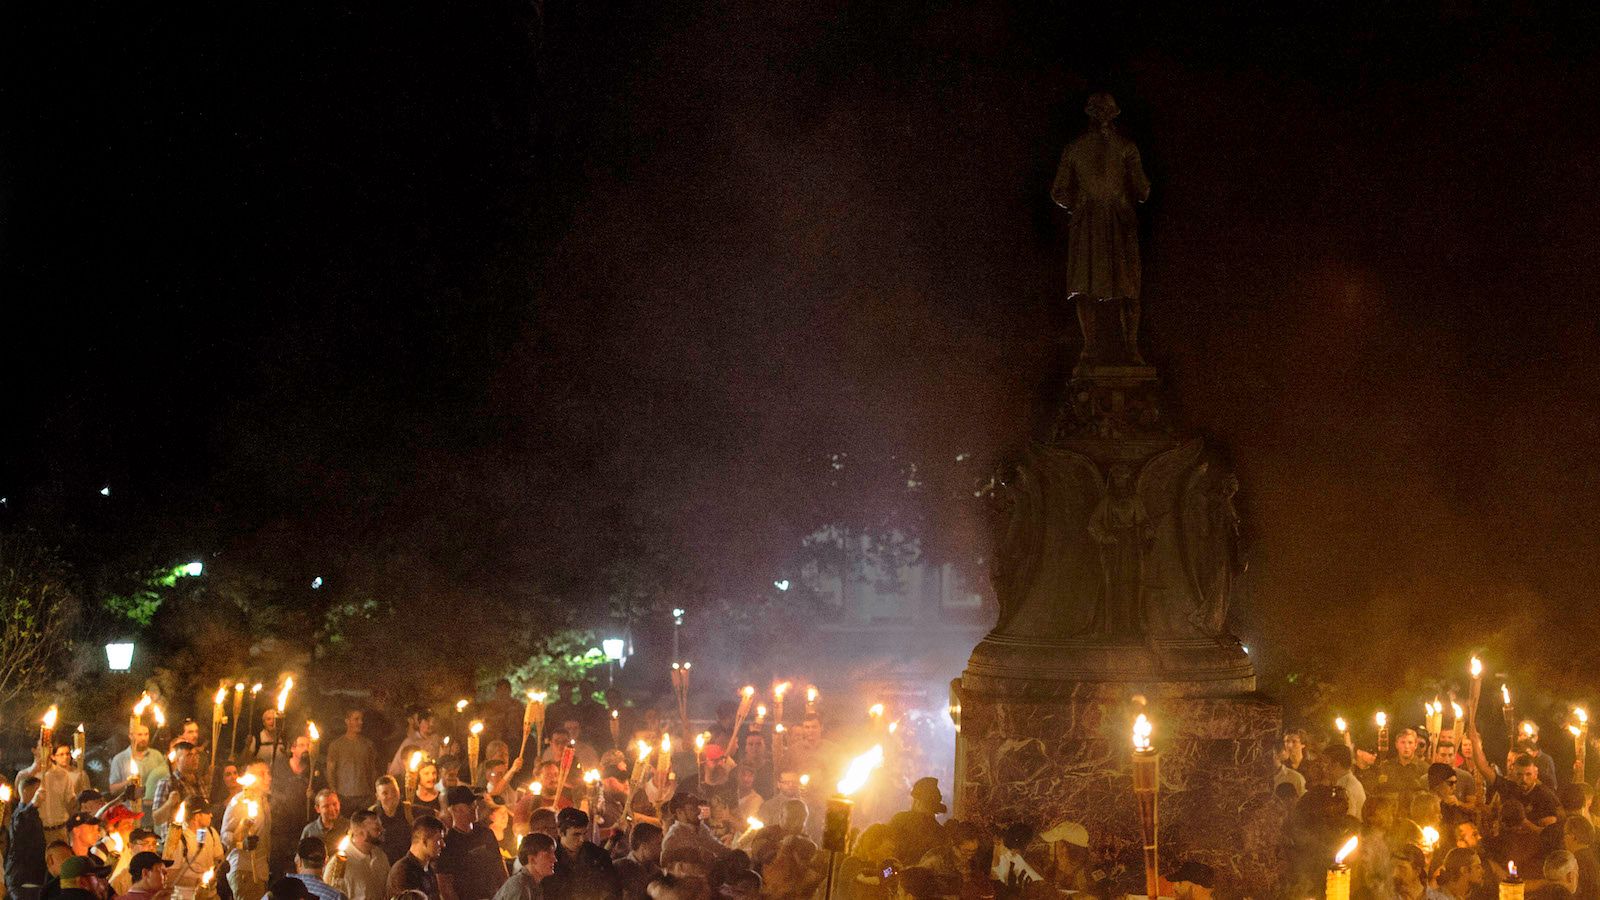 Marchers at a white-supremacy rally encircle counter protestors at the base of a statue of Thomas Jefferson after marching through the University of Virginia campus with torches in Charlottesville, Va., USA on August 11, 2017. (Shay Horse/NurPhoto via Getty Images)